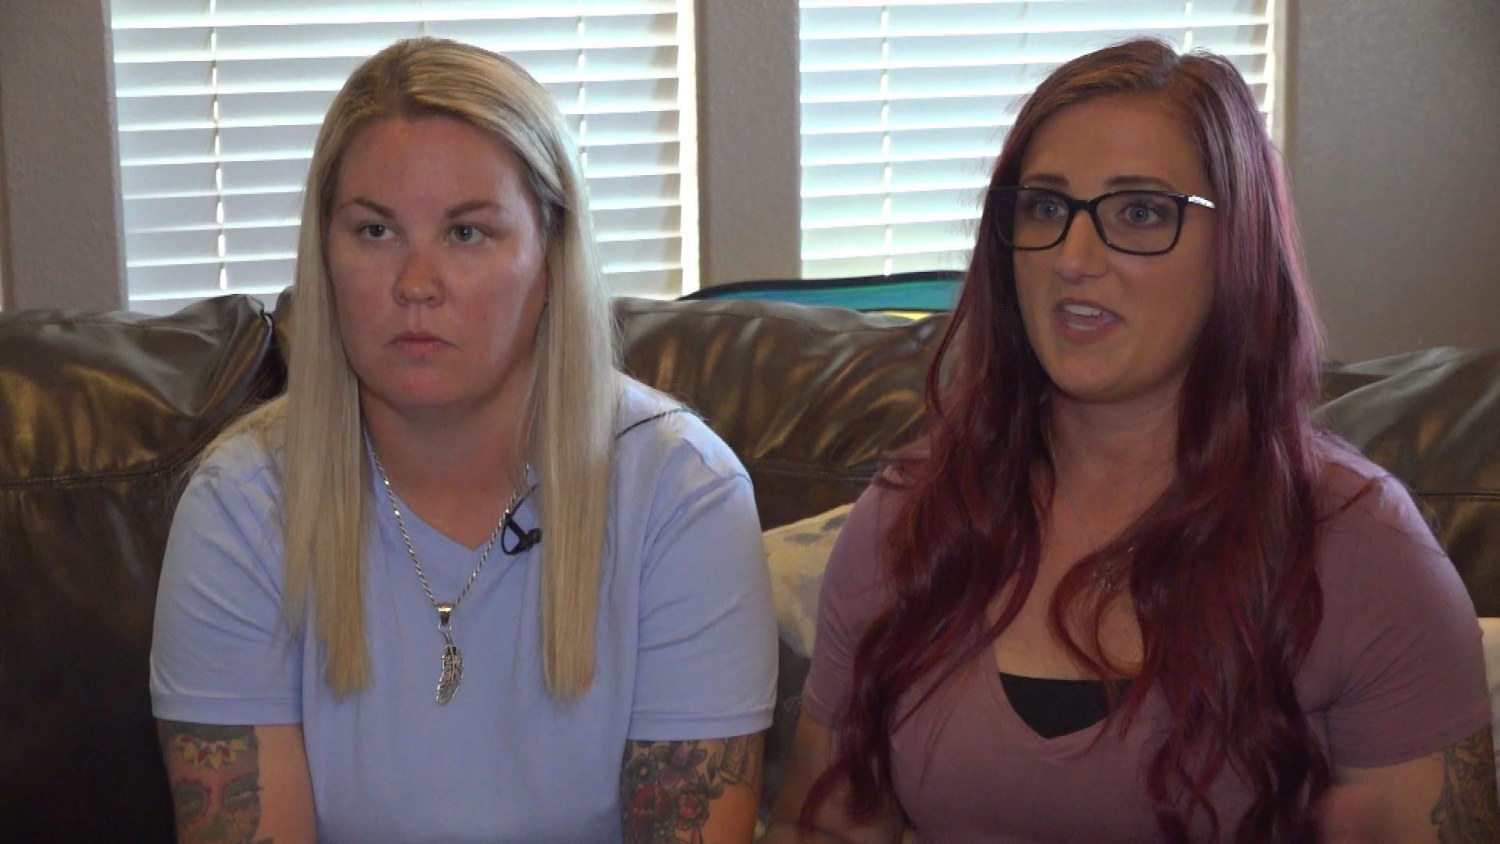 Christian day care center rejects child because she has lesbian parents